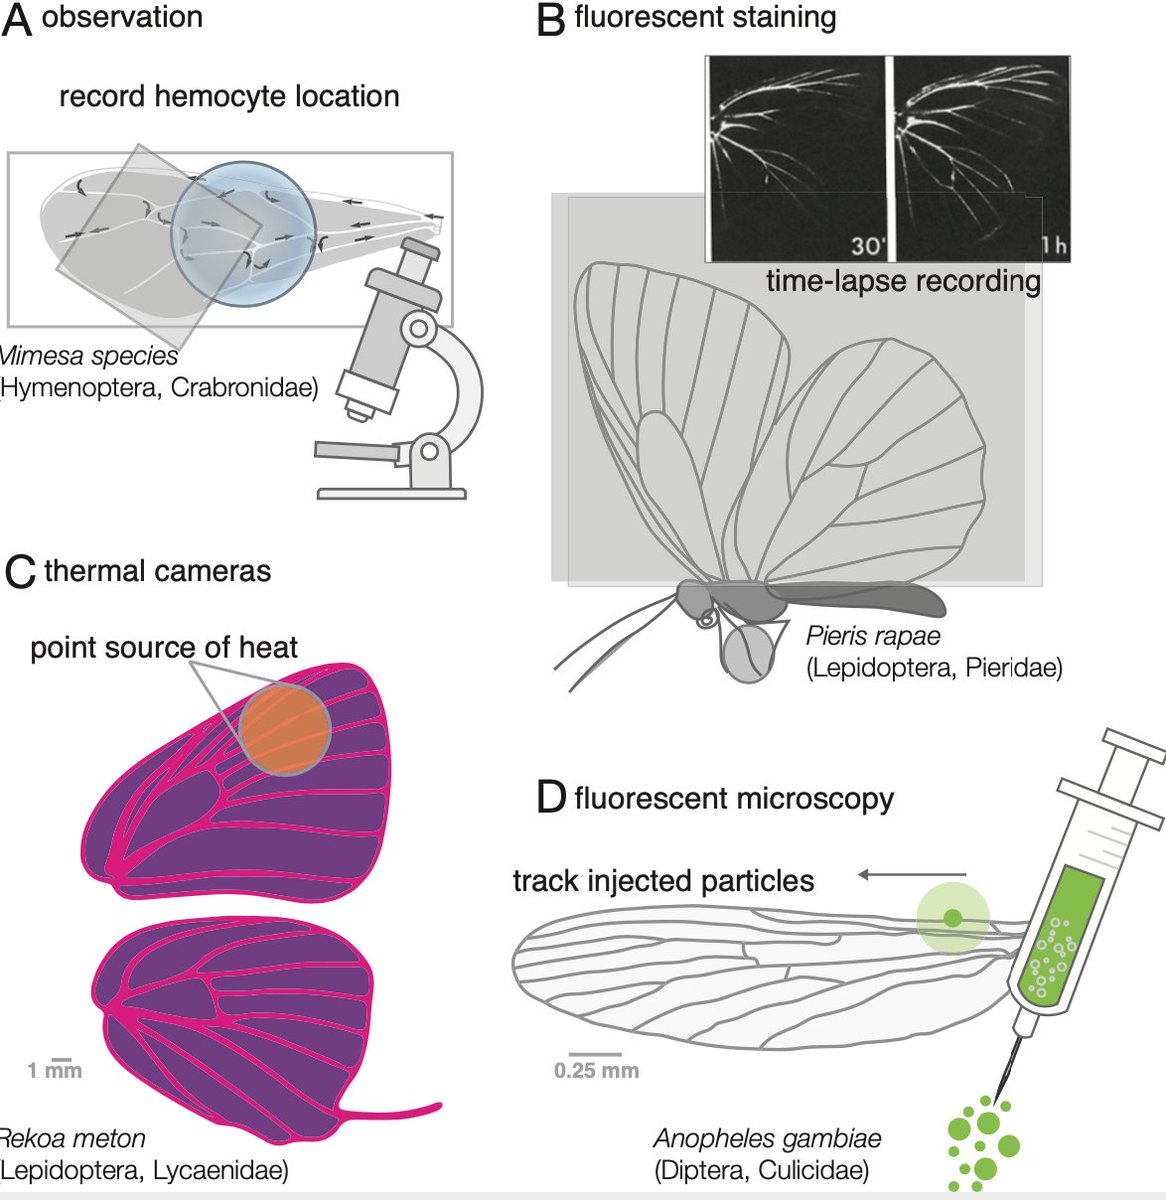 We discuss experimental techniques over the last 60 years to visualize the active circulation in hemolymph wings -- focusing on microscopy work, fluorescent staining, fluorescent spheres, and thermography. /7